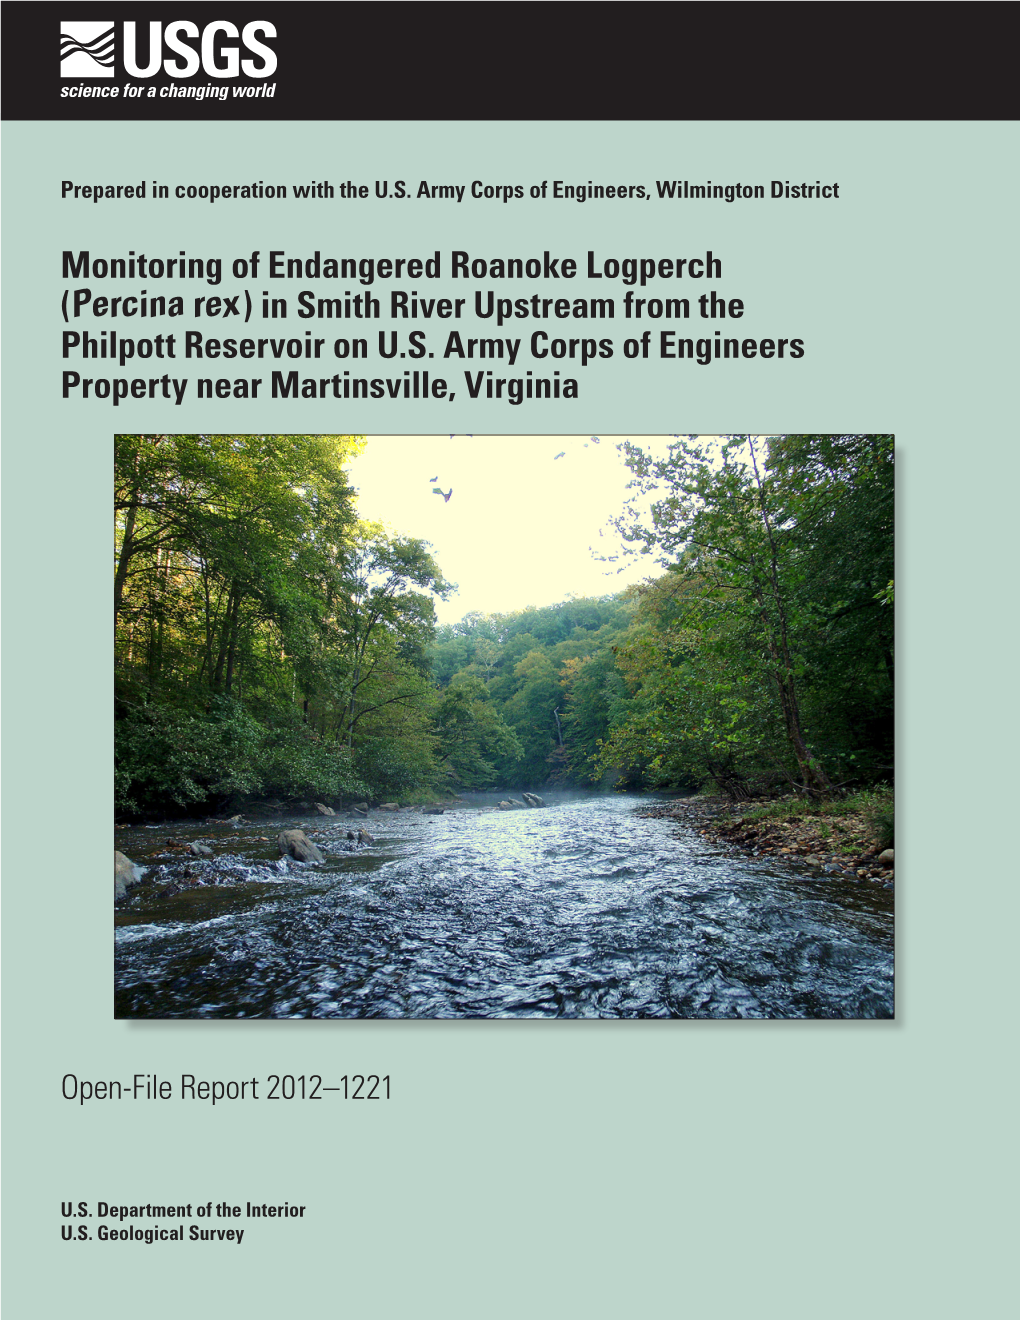 Monitoring of Endangered Roanoke Logperch (Percina Rex) in Smith River Upstream from the Philpott Reservoir on U.S